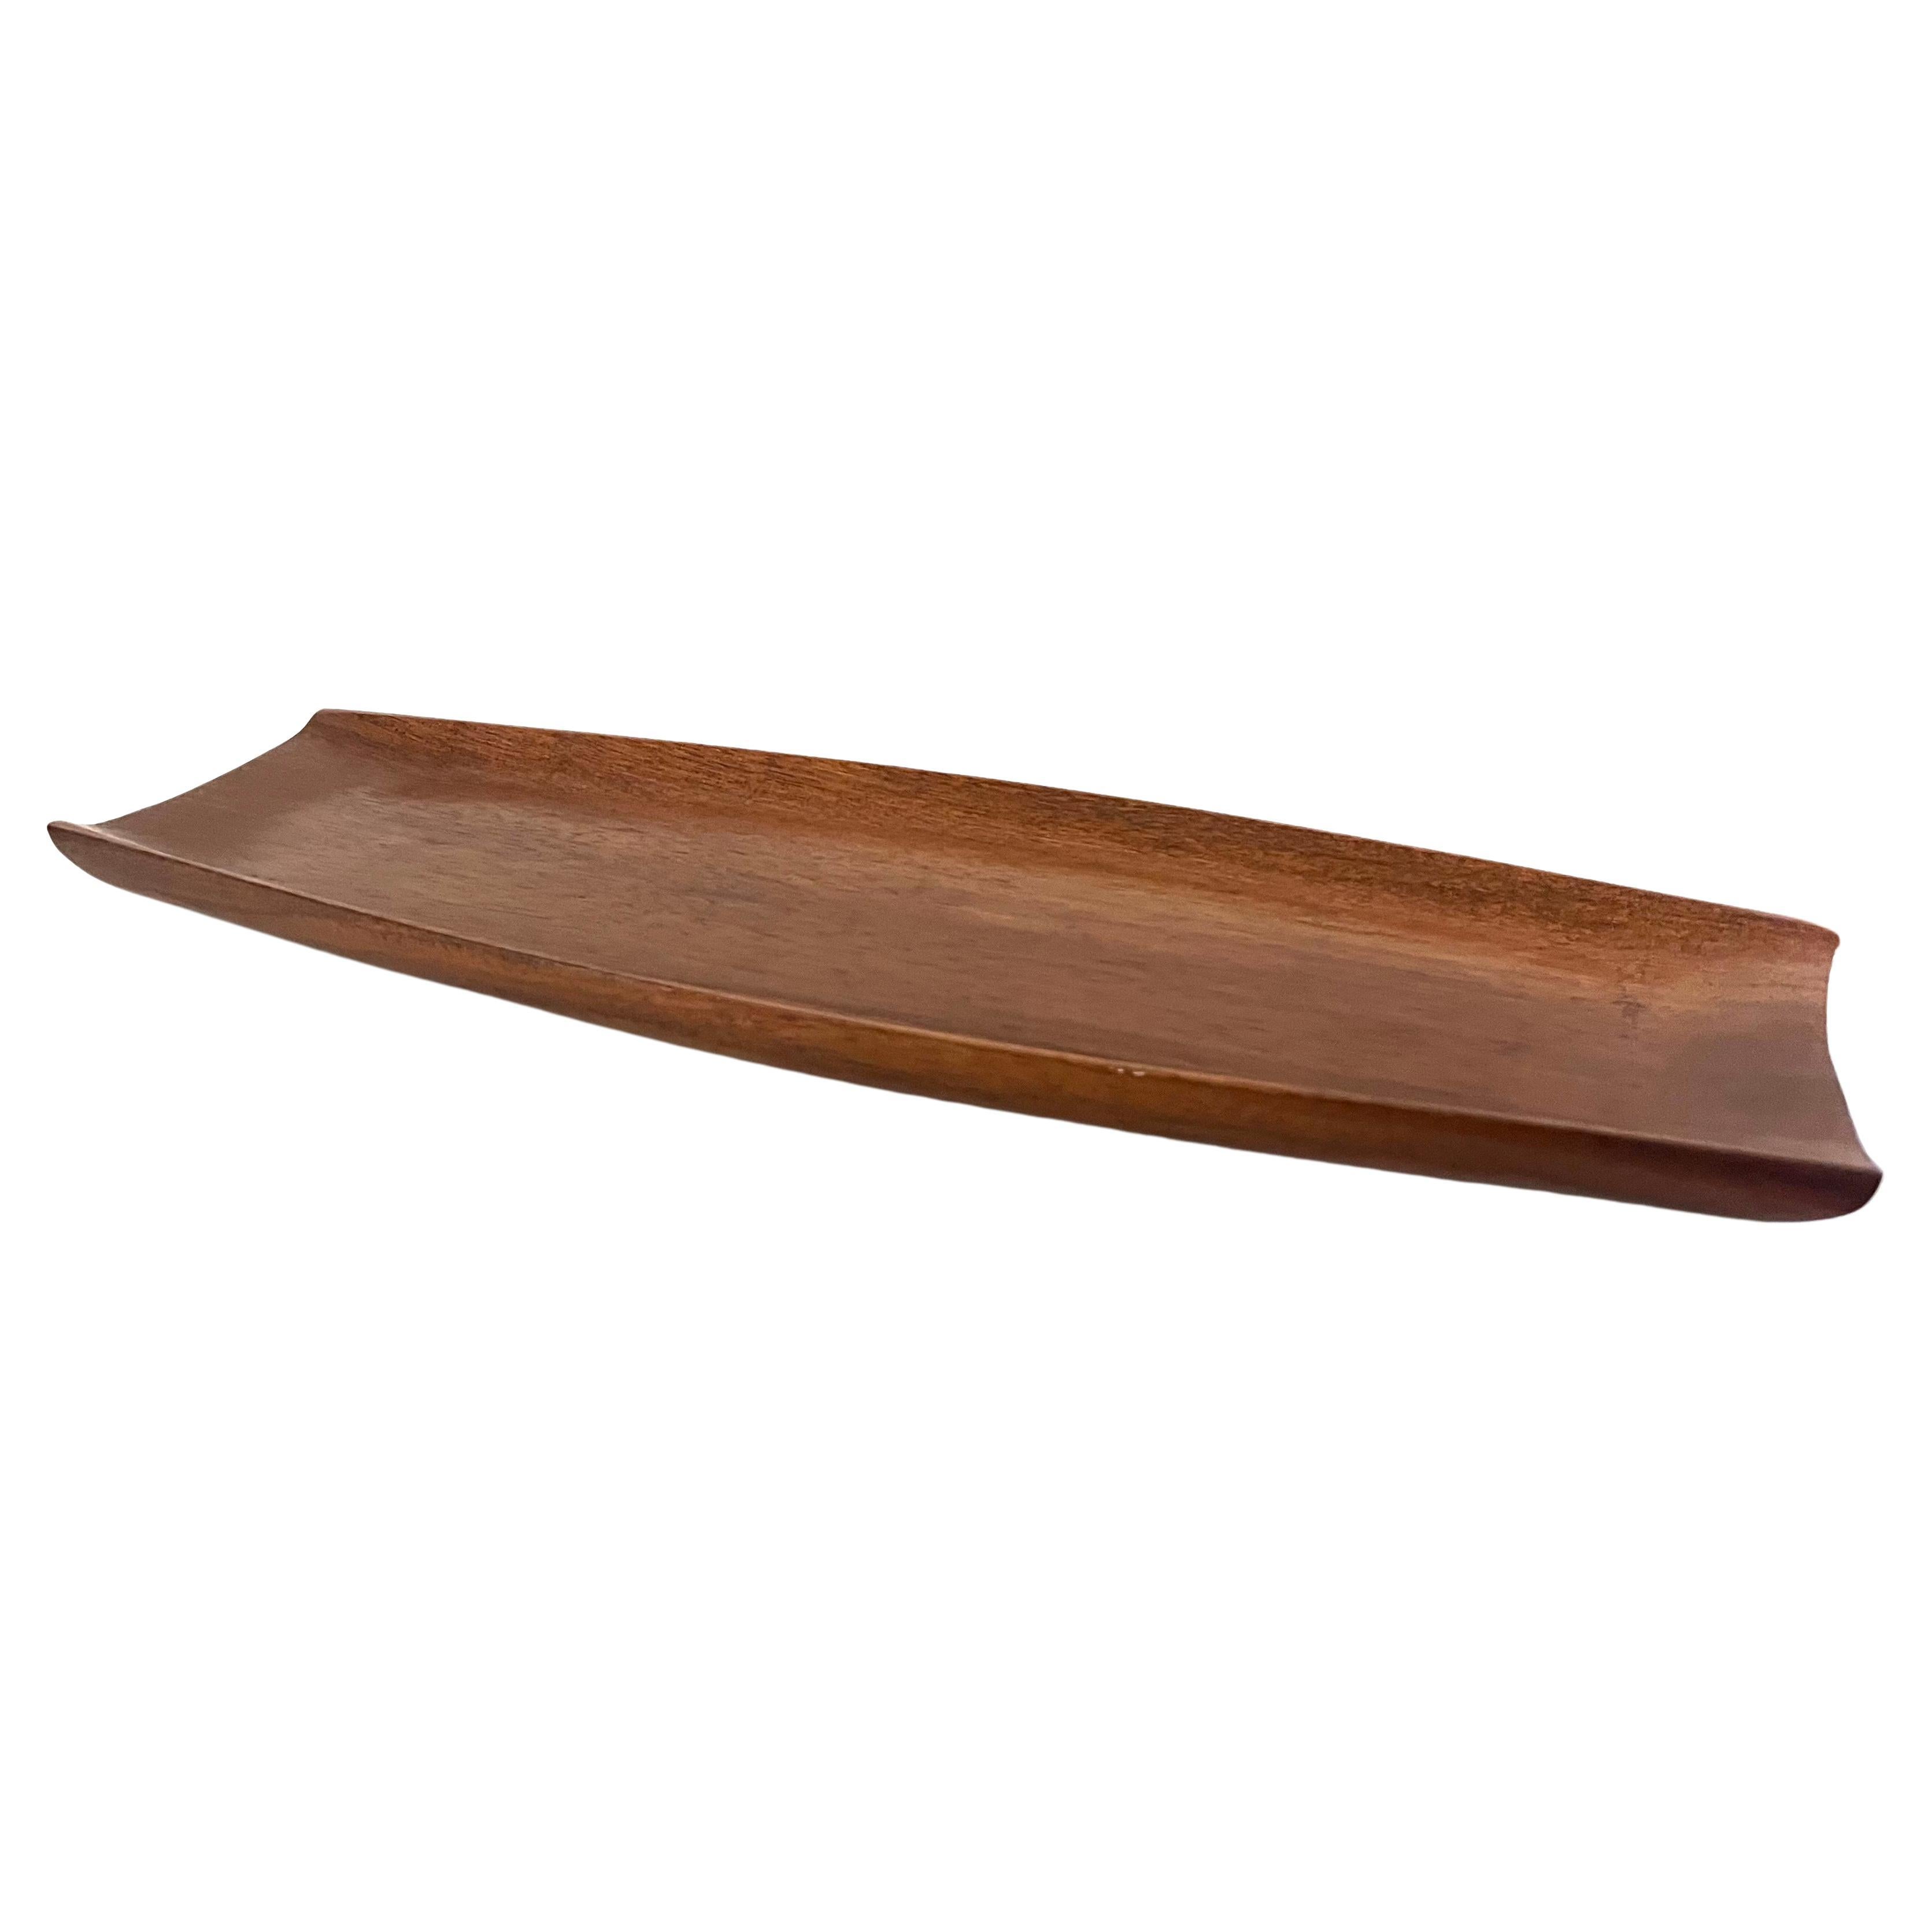 20th Century Danish Modern Solid Teak Catch It All Hand Carved Tray For Sale